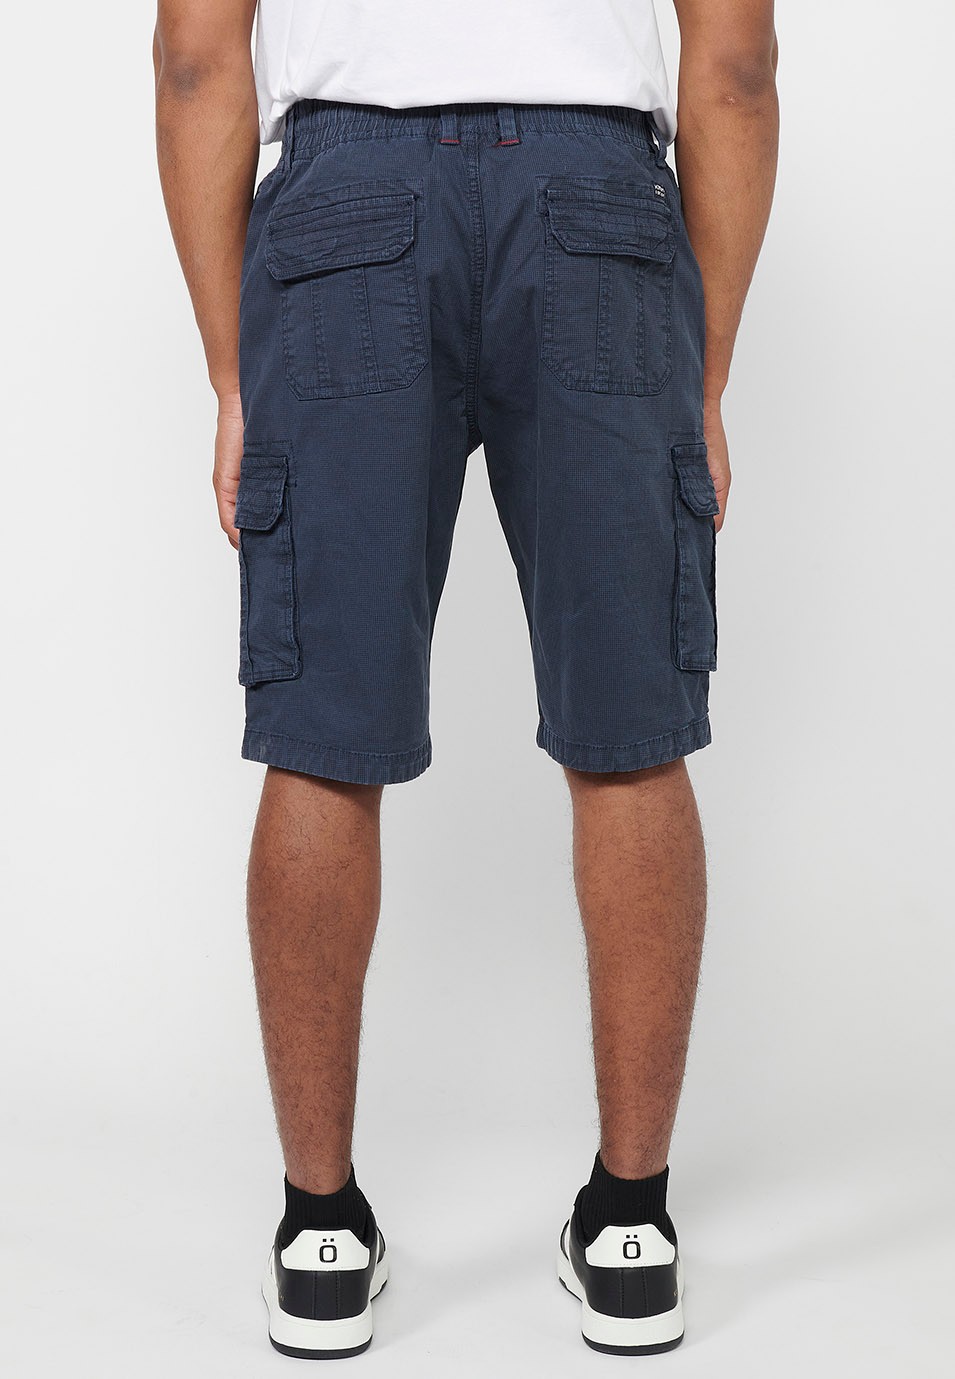 Cargo shorts with front closure with zipper and button and four pockets, two rear pockets with flap with two cargo pockets with flap and adjustable waist with drawstring in Navy Color for Men 3